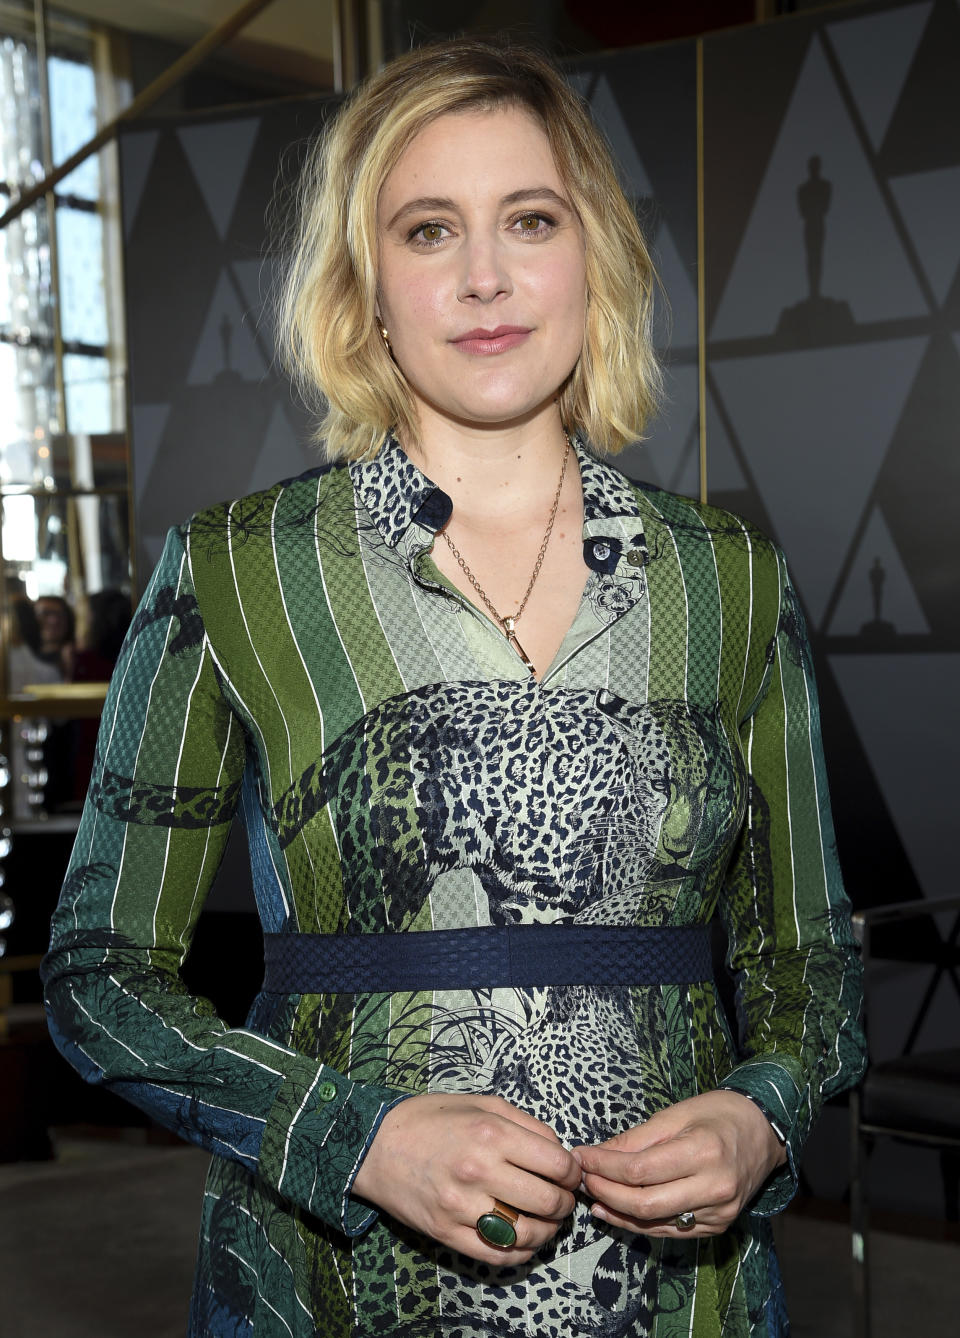 Actor-director Greta Gerwig attends the Academy of Motion Picture Arts and Sciences Women's Initiative New York luncheon at the Rainbow Room on Wednesday, Oct. 2, 2019, in New York. (Photo by Evan Agostini/Invision/AP)